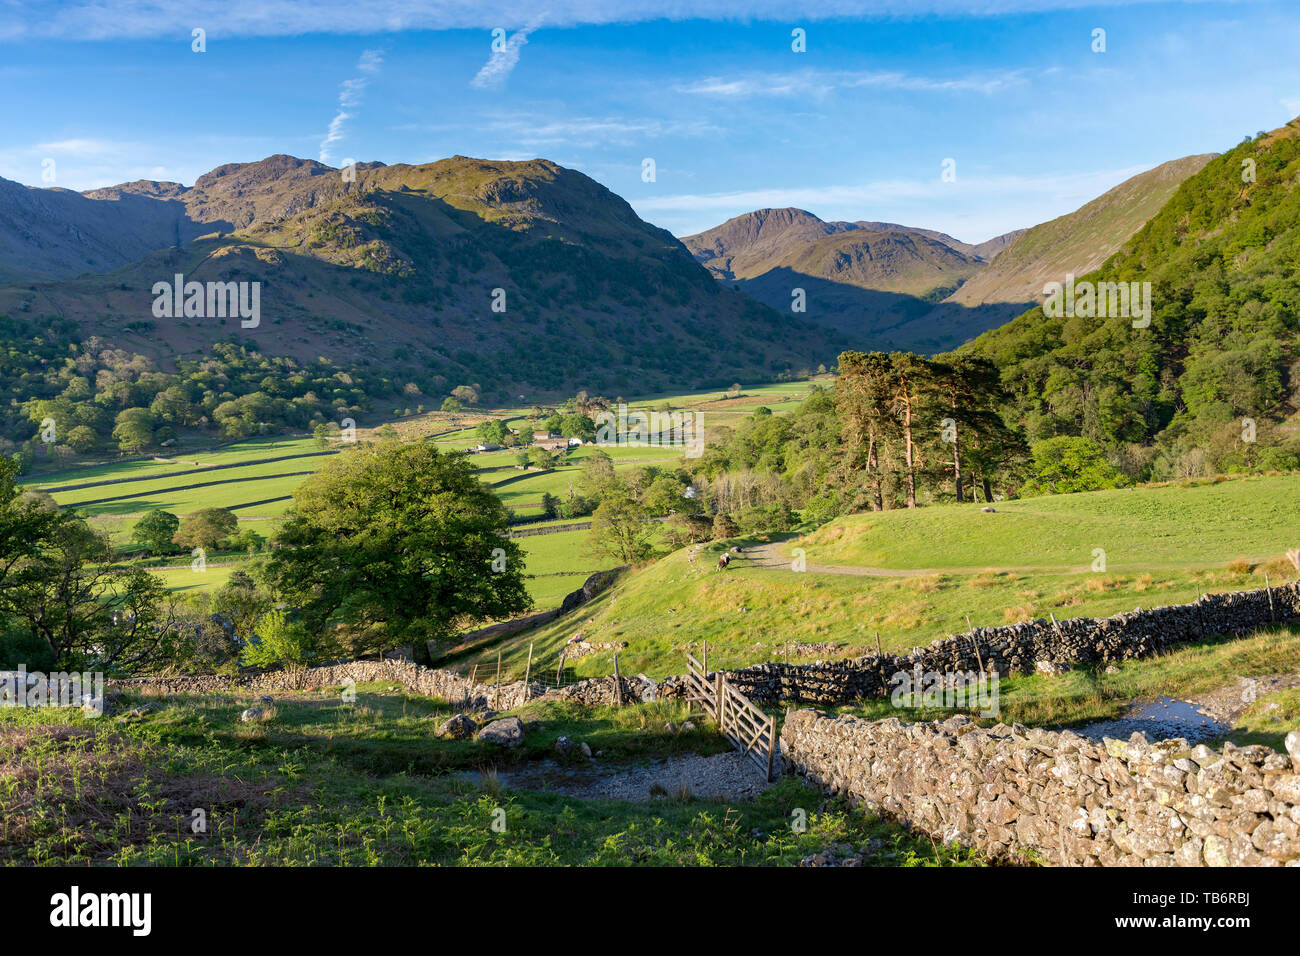 The view looking down onto Seatoller, Borrowdale Valley, with farm buildings  in the Borrowdale Valley, Cumbira, Lake District National Park UK. Stock Photo